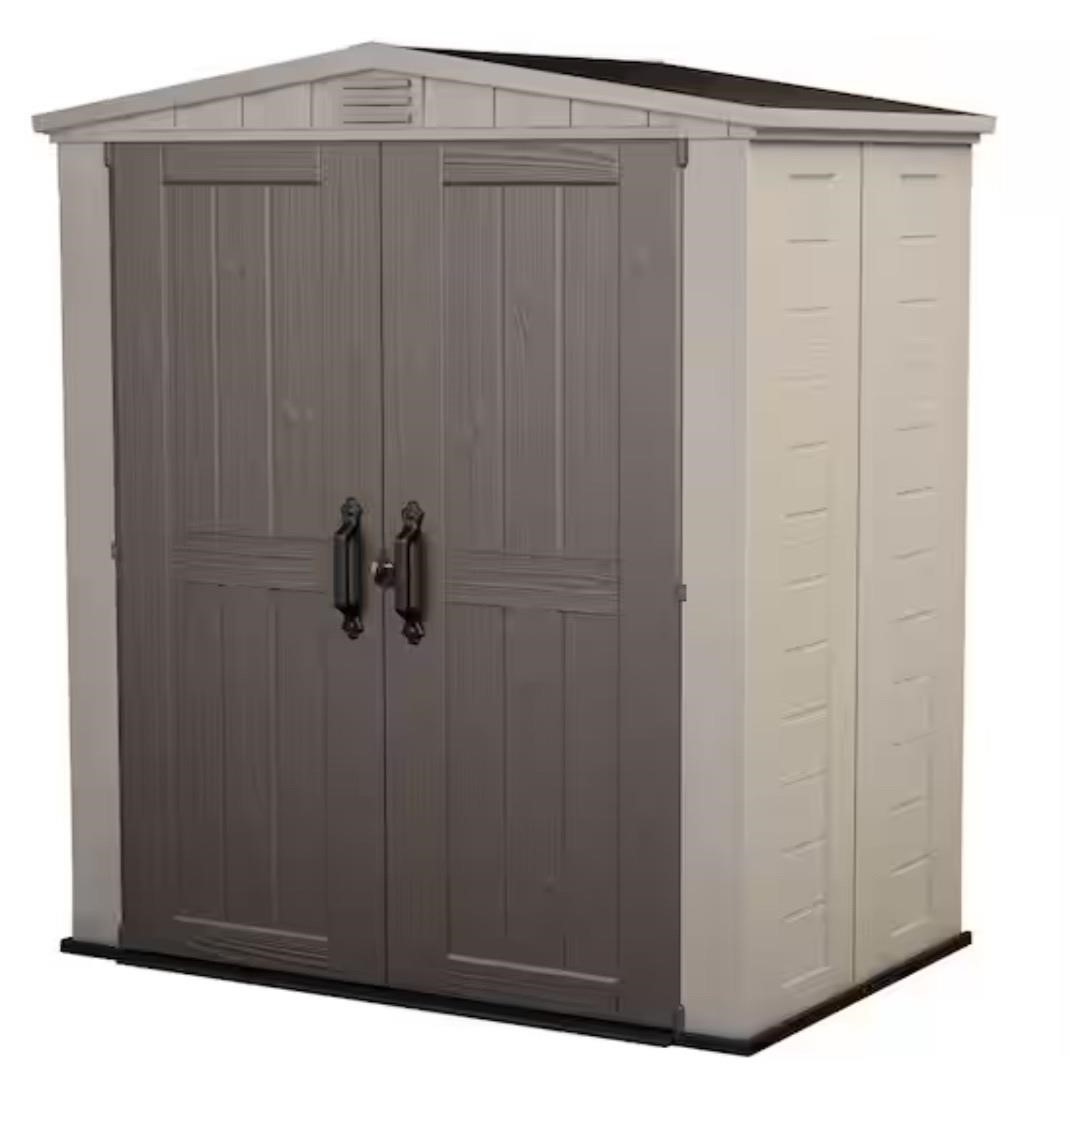 Keter Factor 6x3 Outdoor Durable Plastic Shed